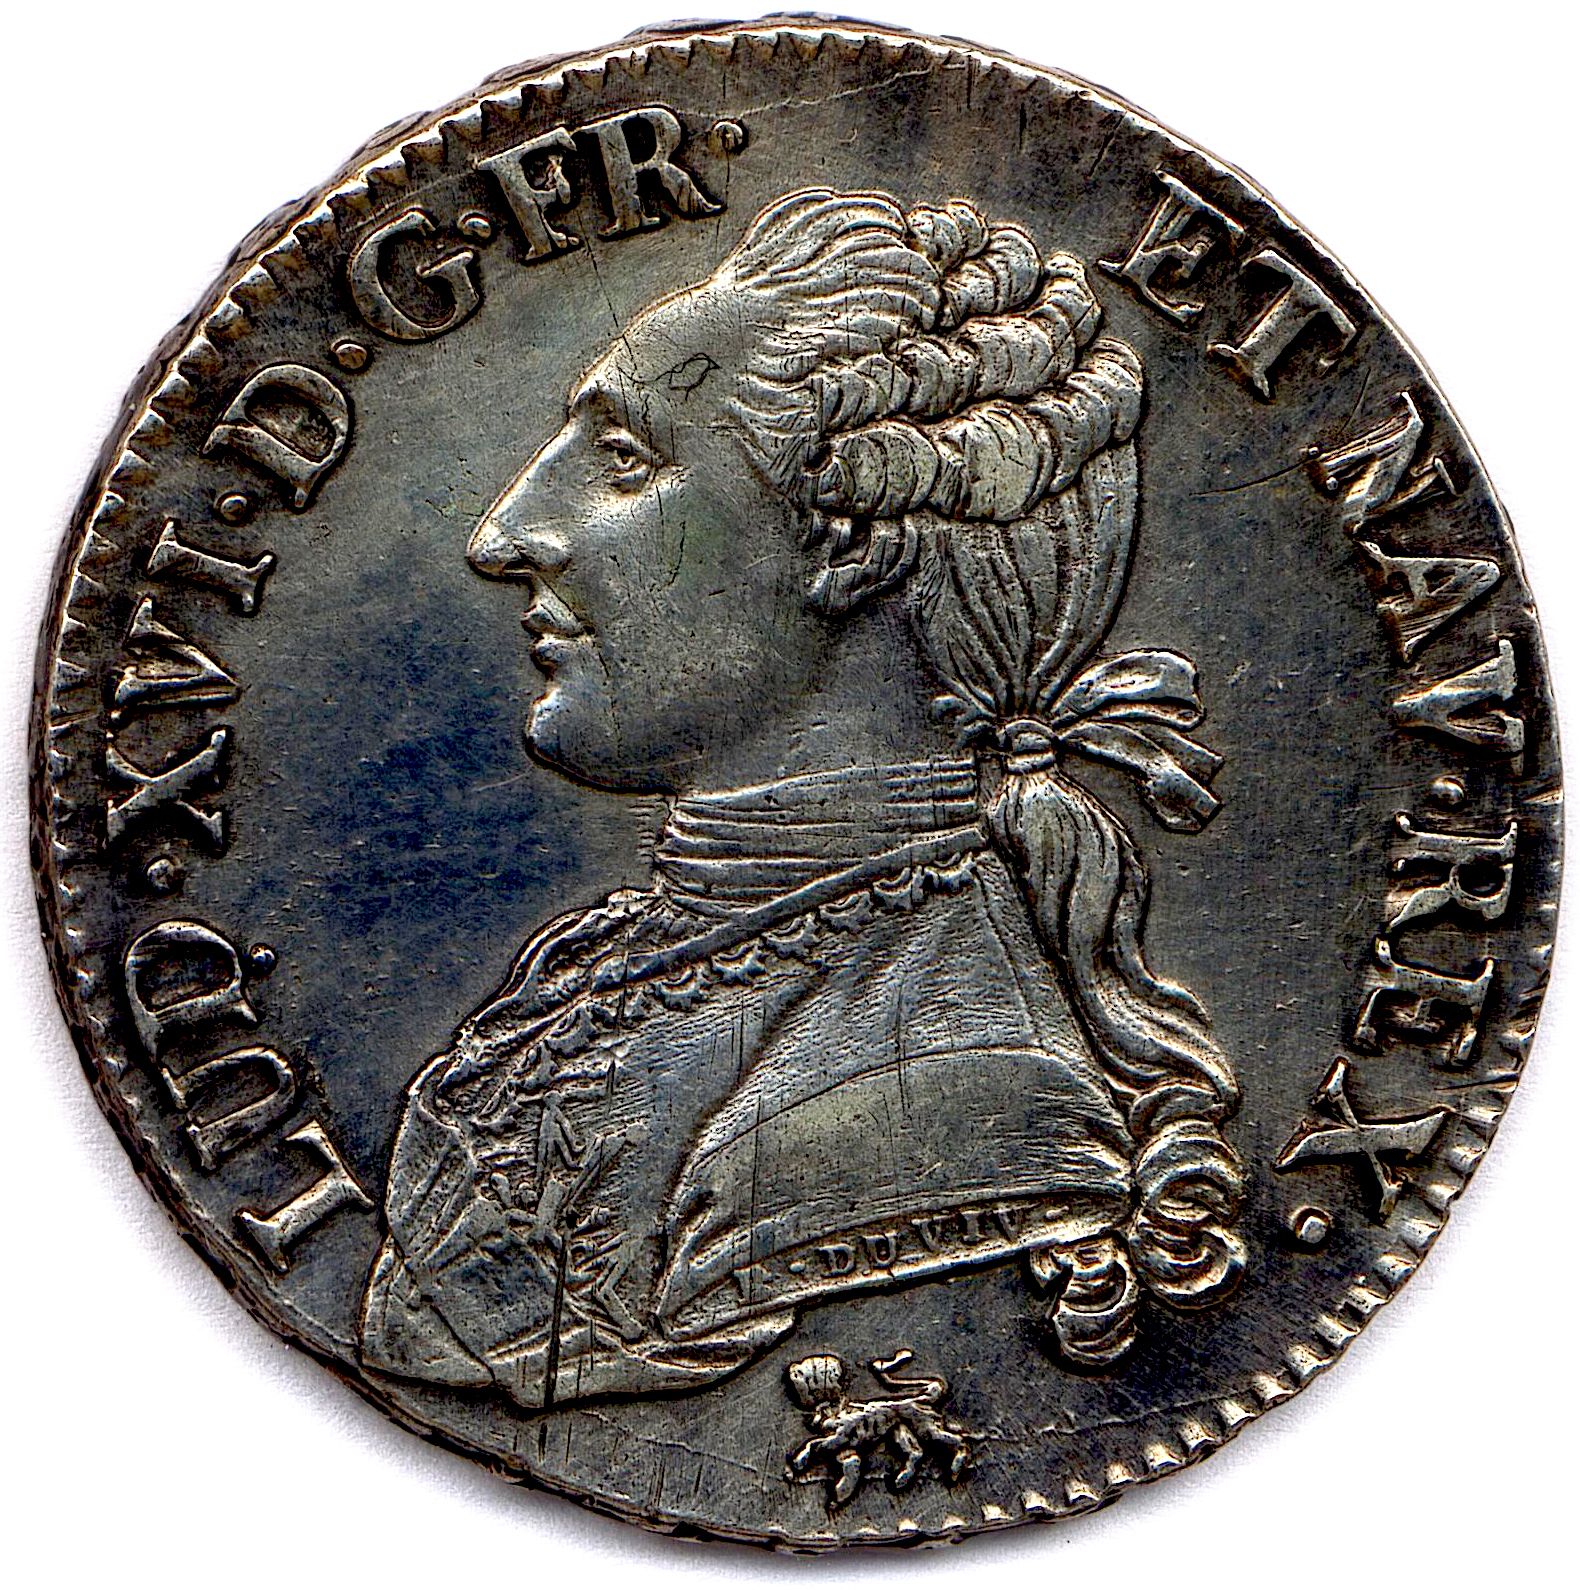 Null LOUIS XVI 1774-1793

Half of the bust dressed 1791 A = Paris. 

(14,68 g) V&hellip;